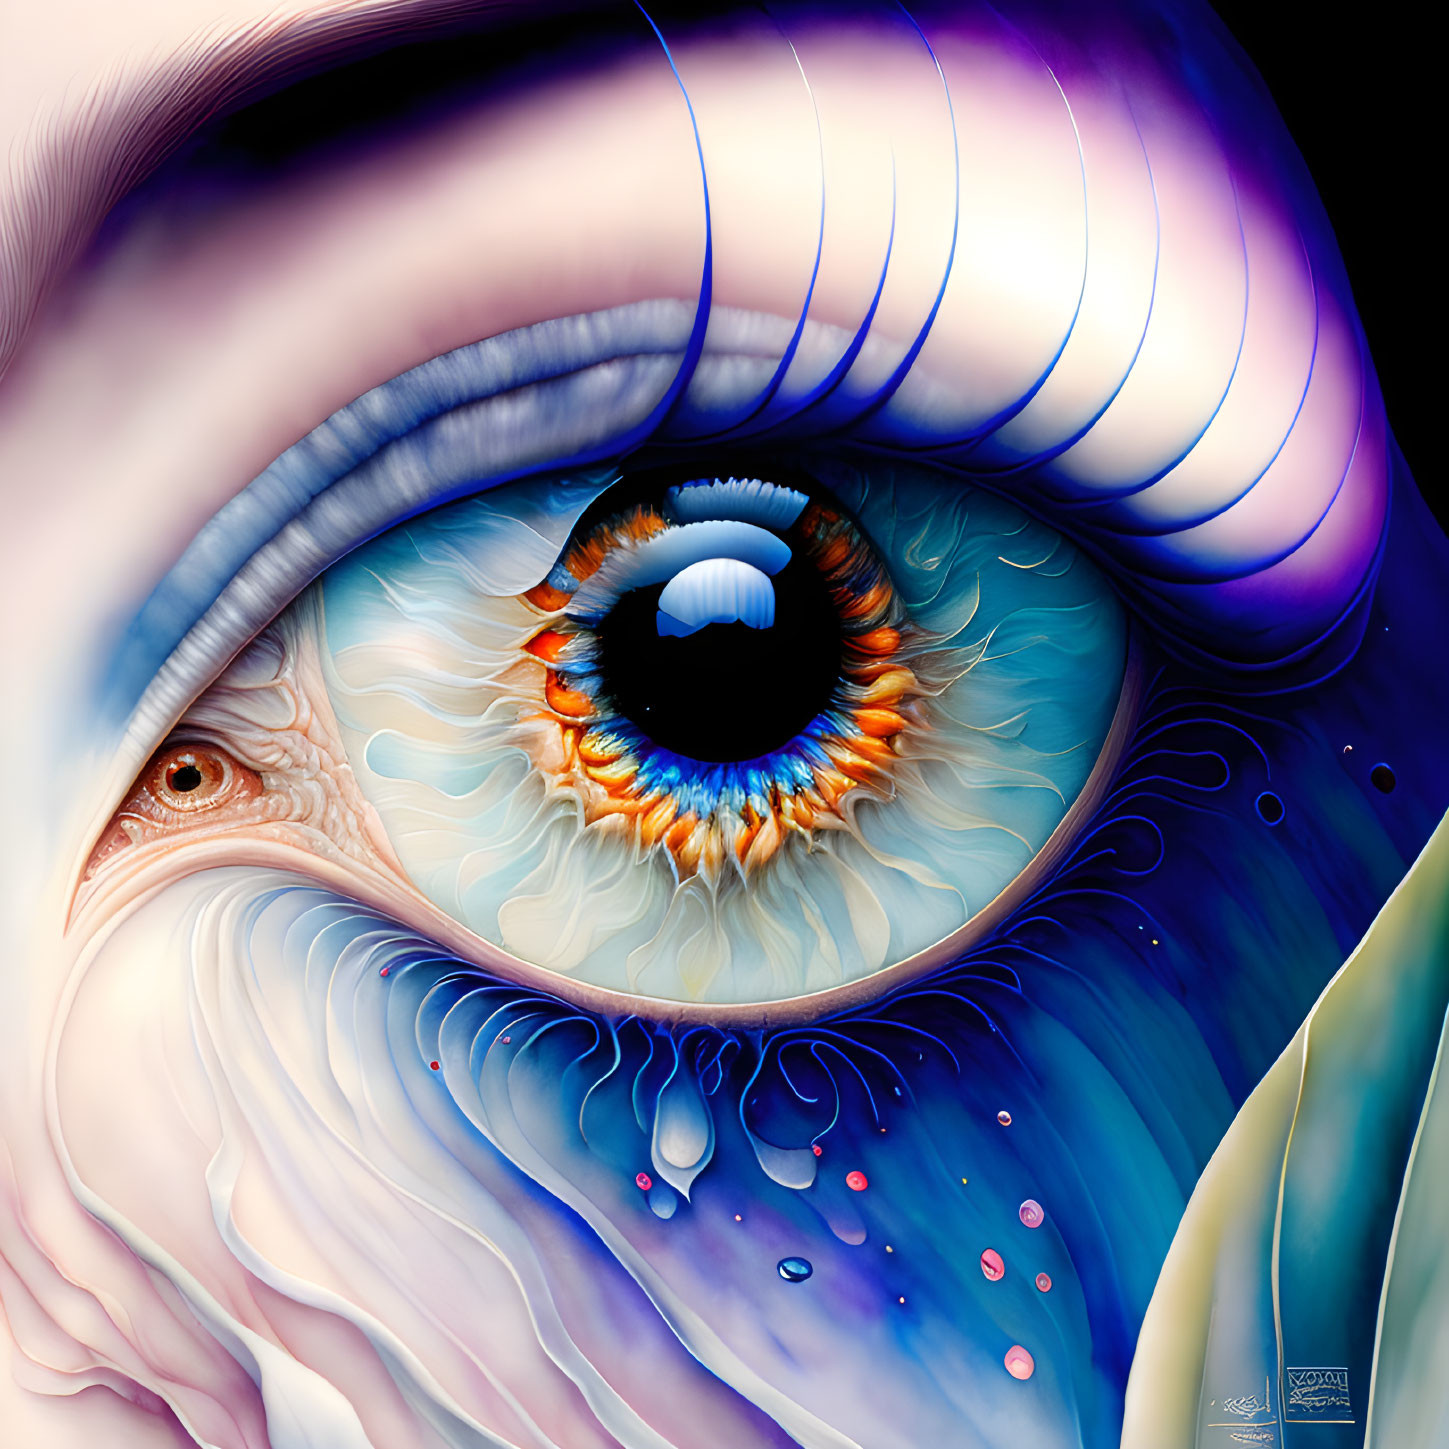 Colorful surreal human eye illustration with exaggerated features